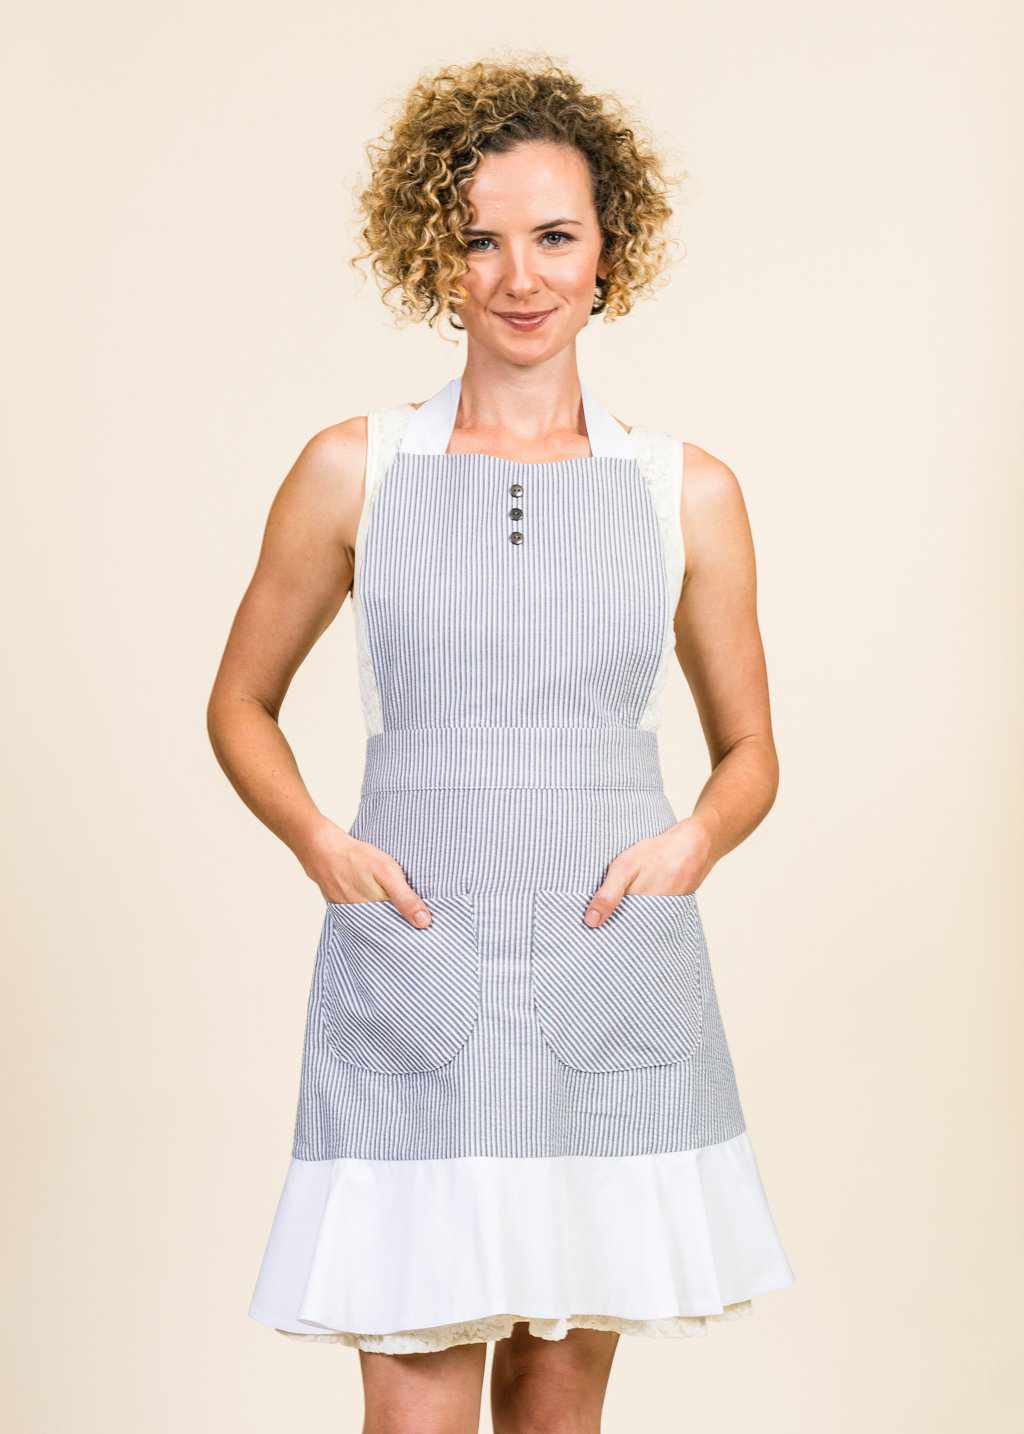 Proudly wearing her black and white seersucker apron with white ruffle, an attractive woman faces the camera